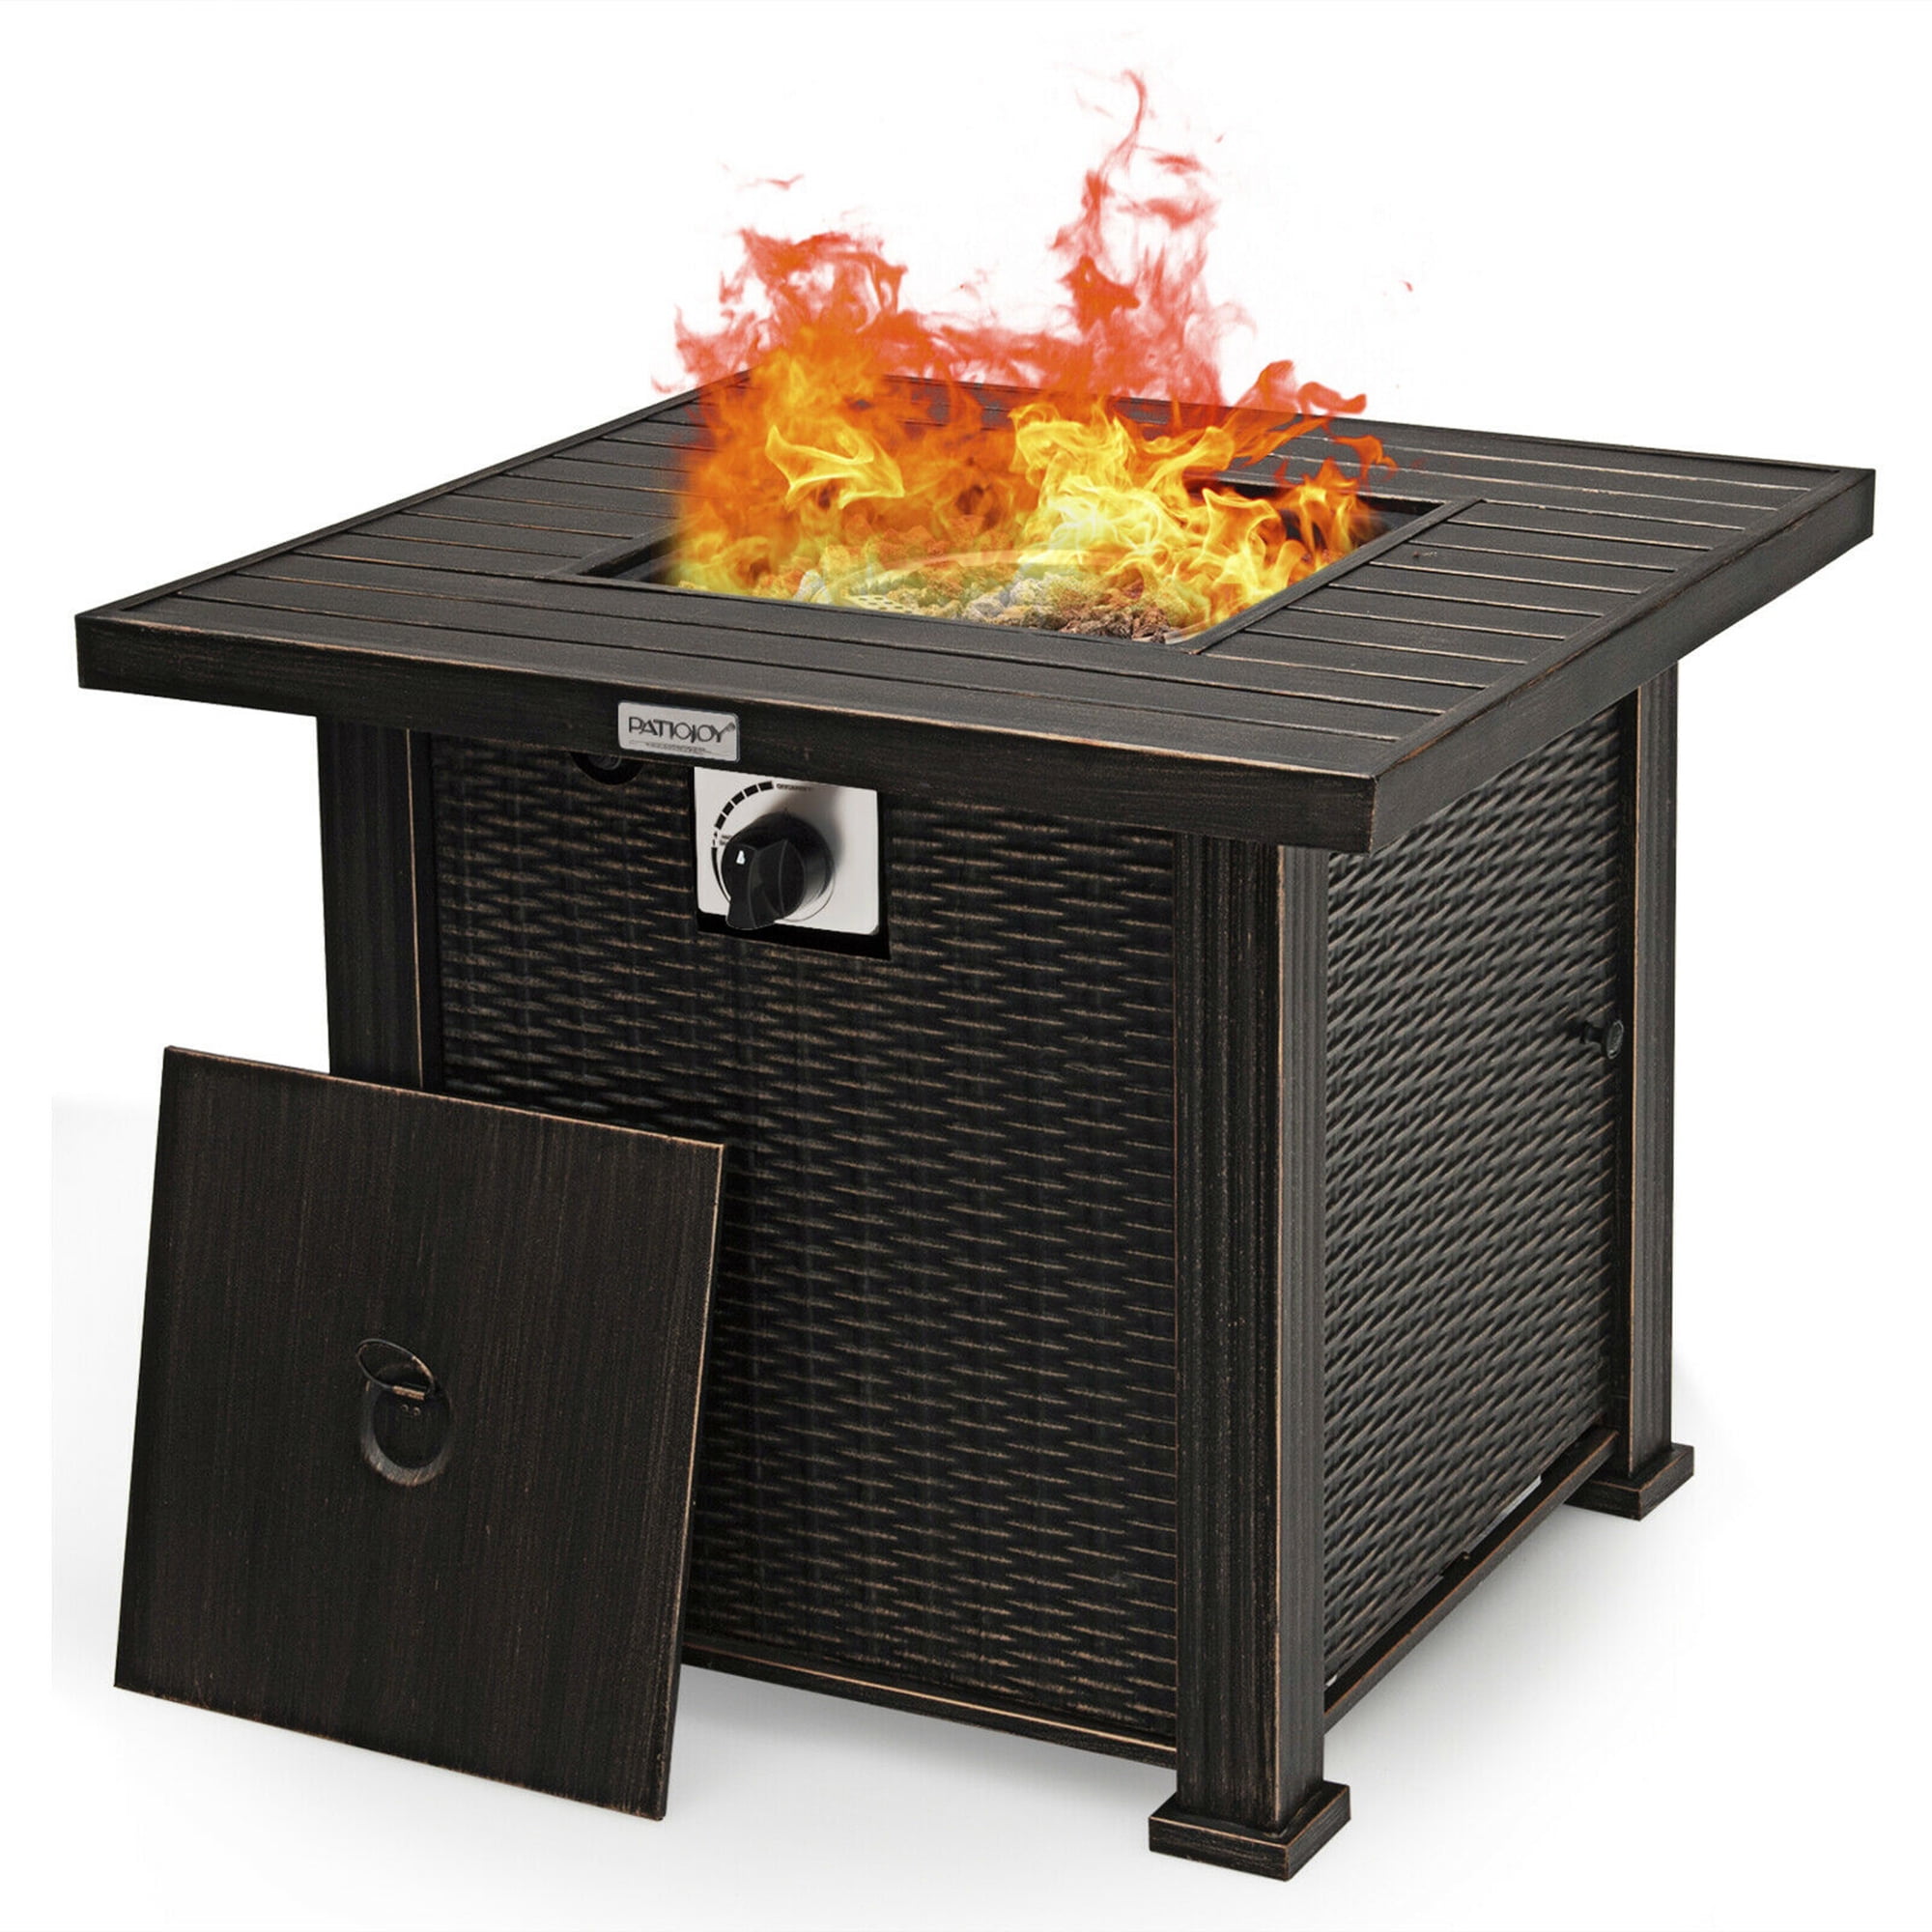 Gymax 30 Gas Fire Pit Table 50 000 Btu, Square Lp Gas Fire Pit With Slate Mantel